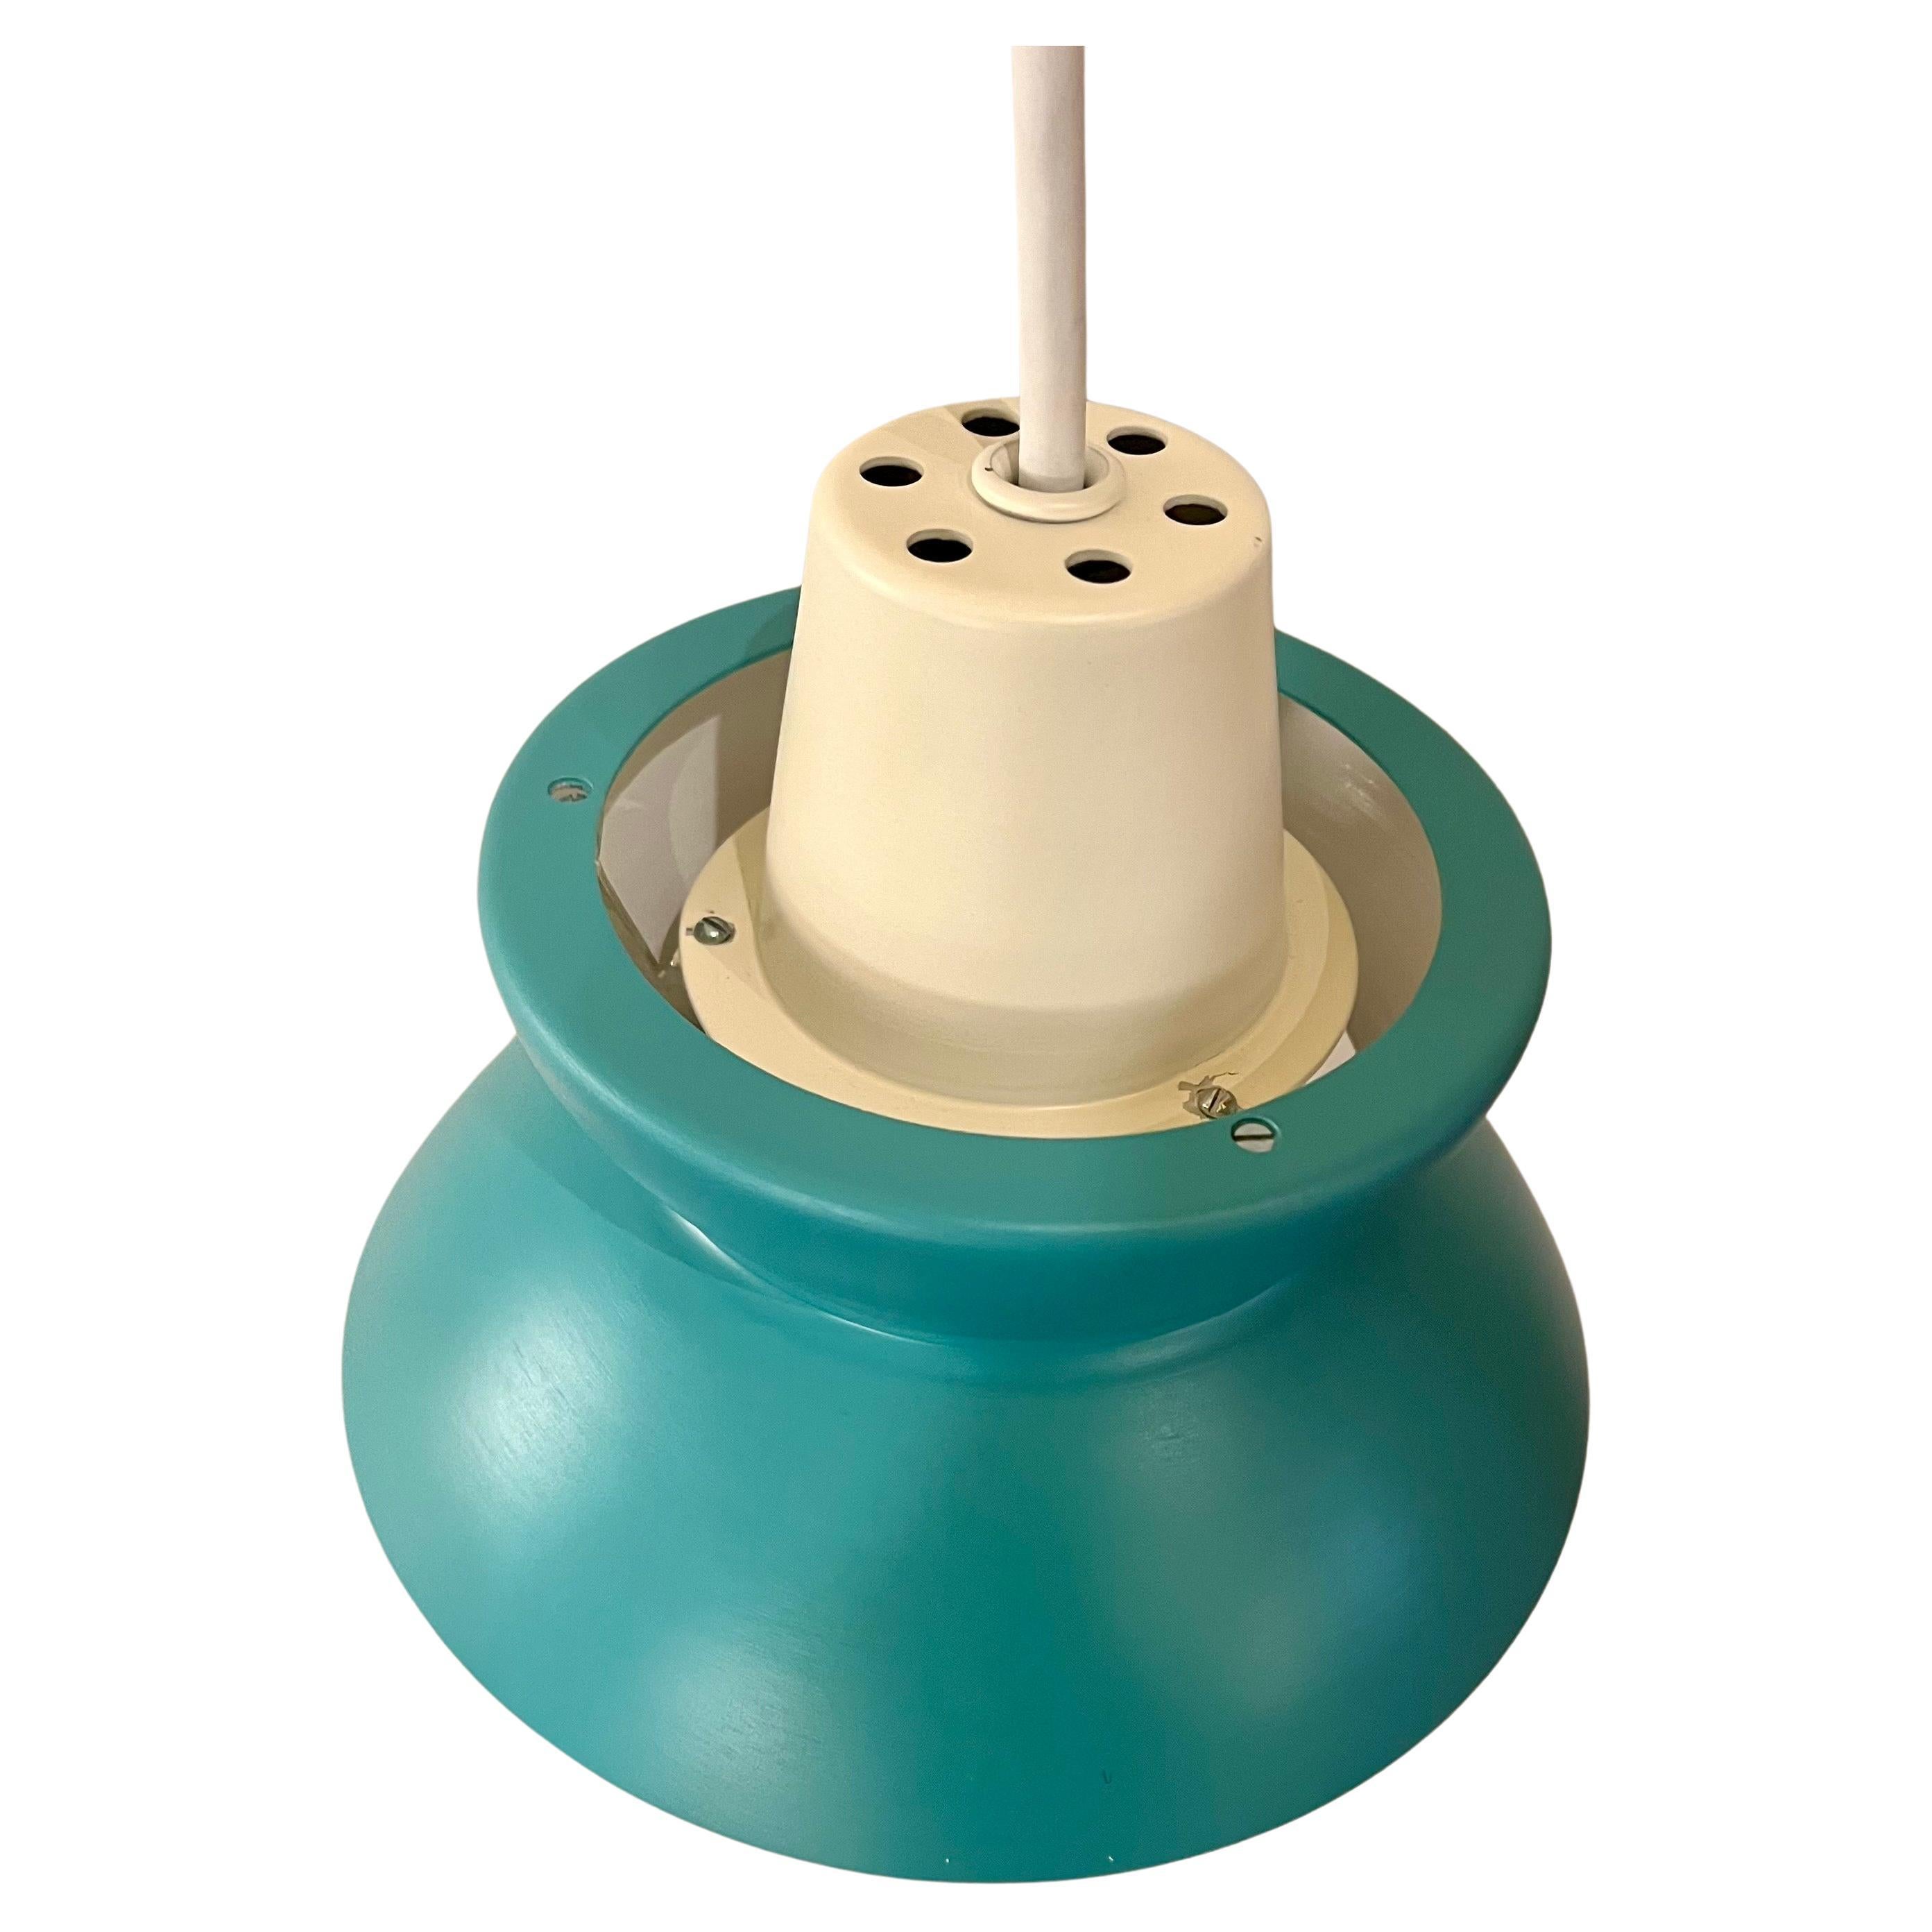 Beautiful condition on this small pendant lamp designed by Claus Bonderup & Torsten Thorup for Fog & Mørup, like new condition never used comes with canopy for celling new cord beautiful turquoise color with white enameled aluminium .
     